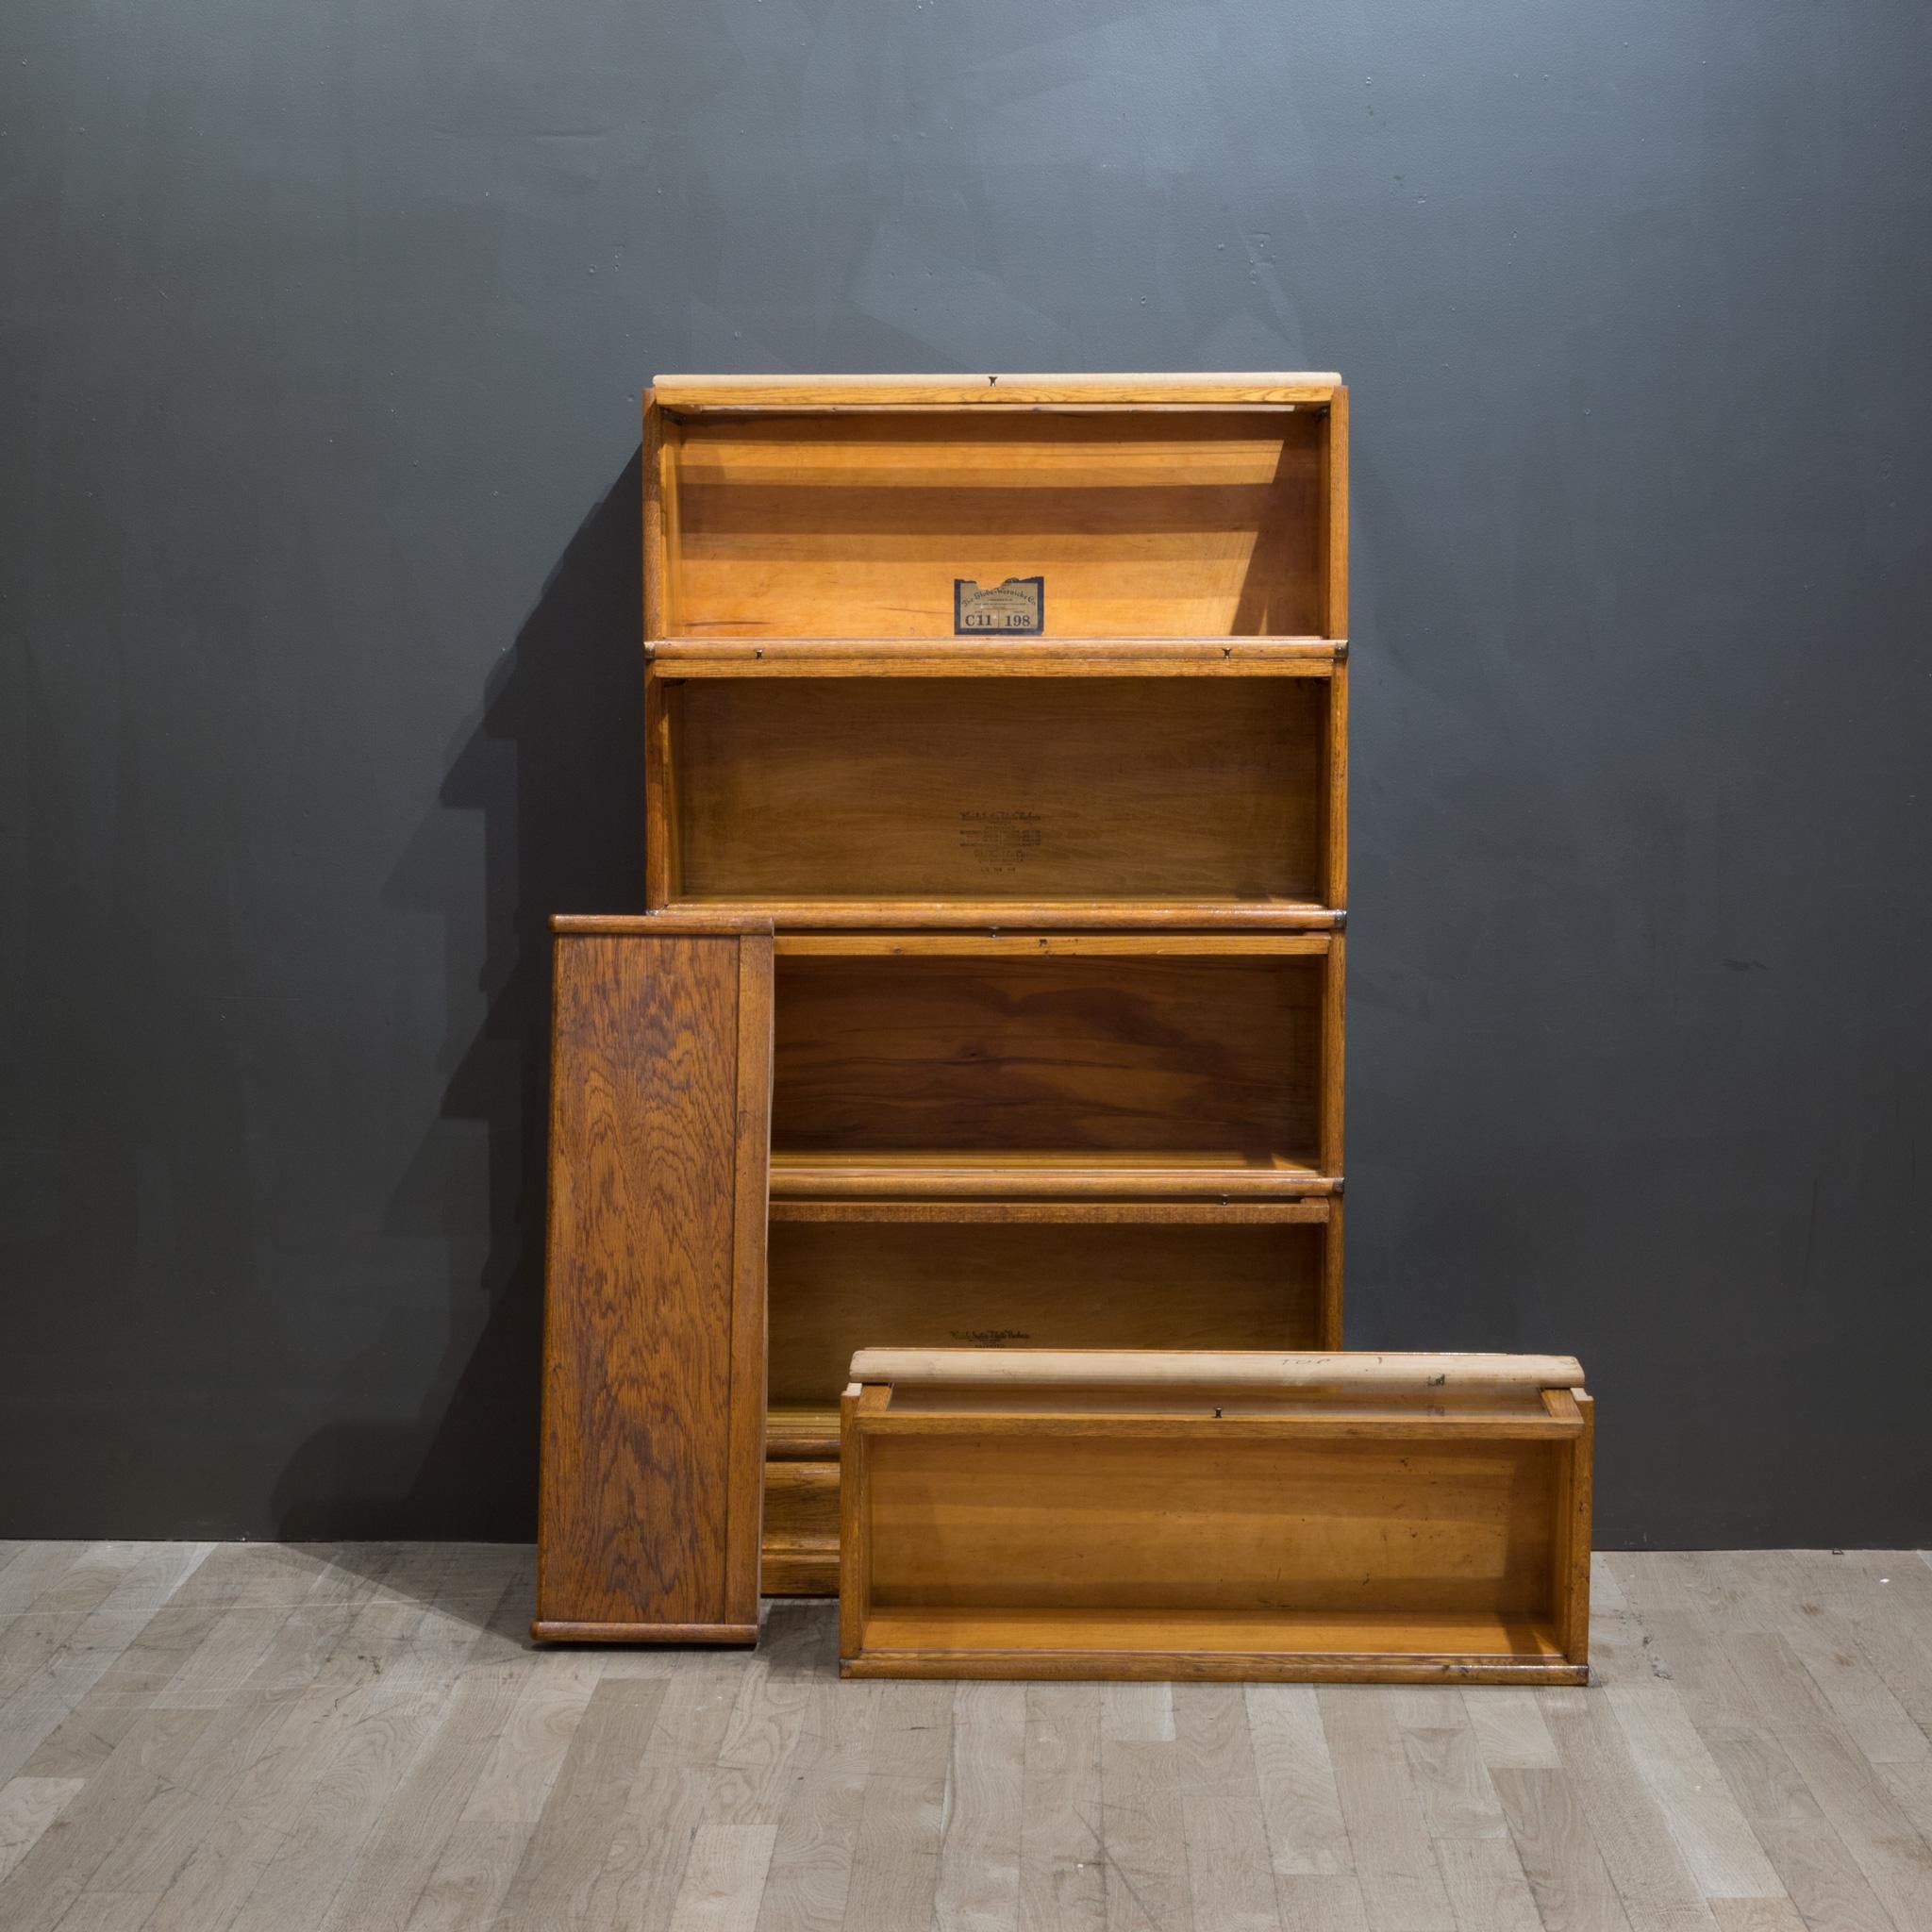 Early 20th C. Globe-Wernicke 5 Stack Lawyer's Bookcase c.1890 5